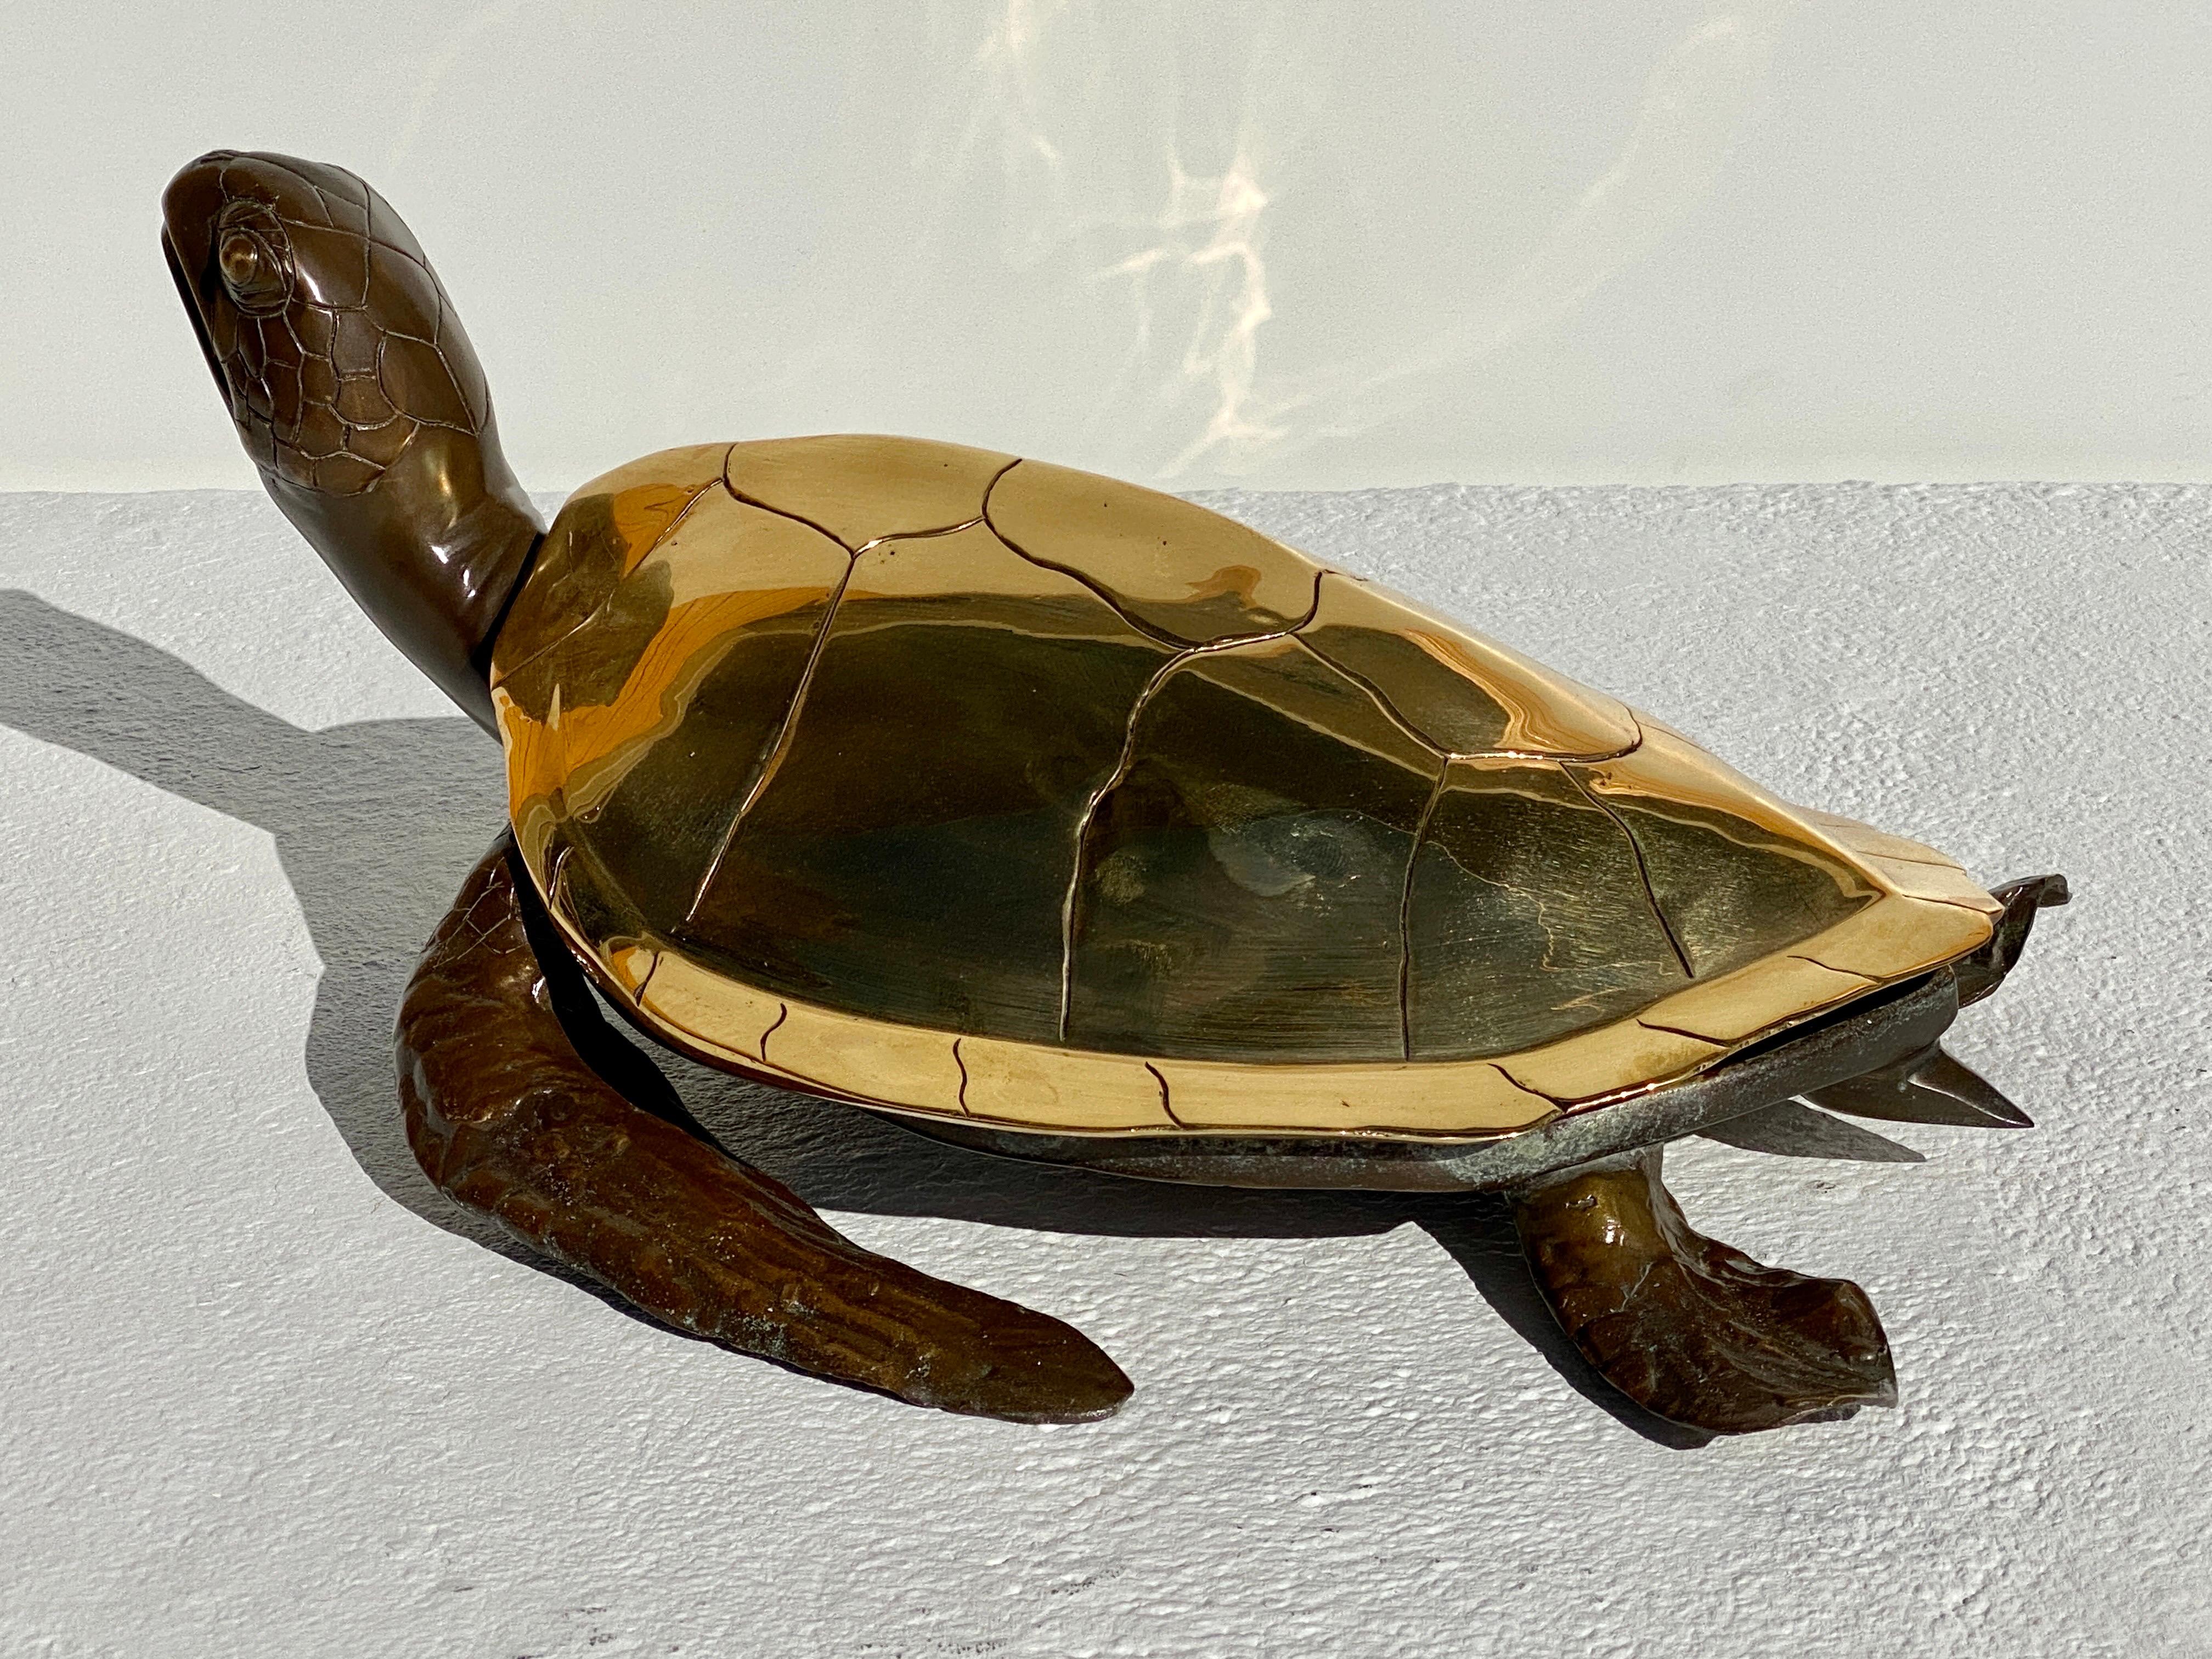 Brass sea turtle sculpture / decorative box / catch all.
Shell is in polished brass and the rest of body is in patinated finish. We also have a larger version in our other listing LU985031285462